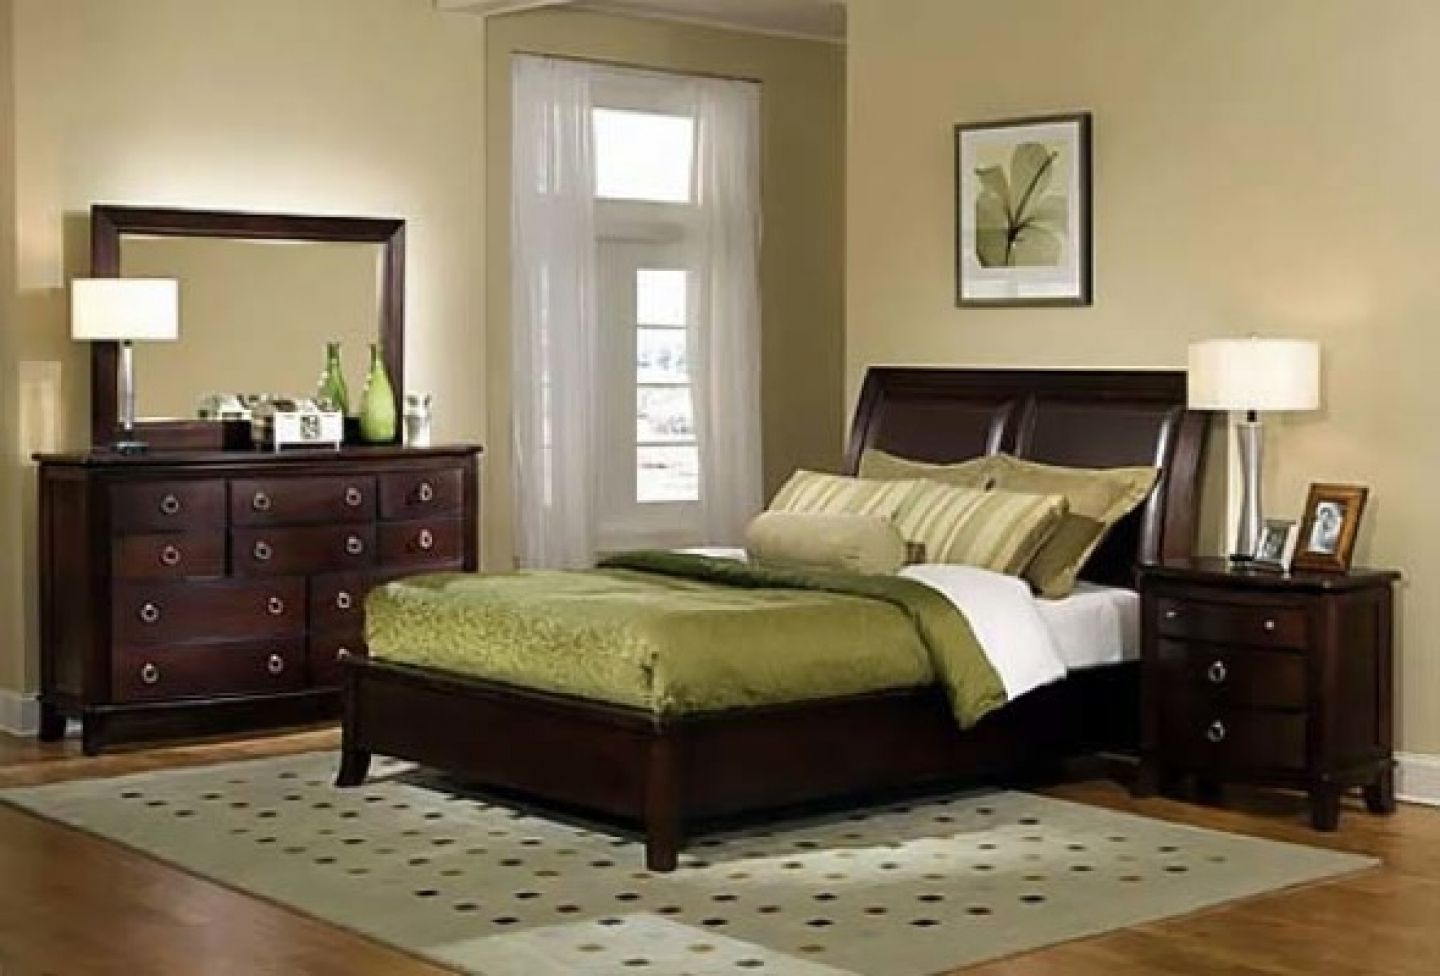 Cream Paint Colors For Bedroom With Dark Furniture With Wood regarding proportions 1440 X 976